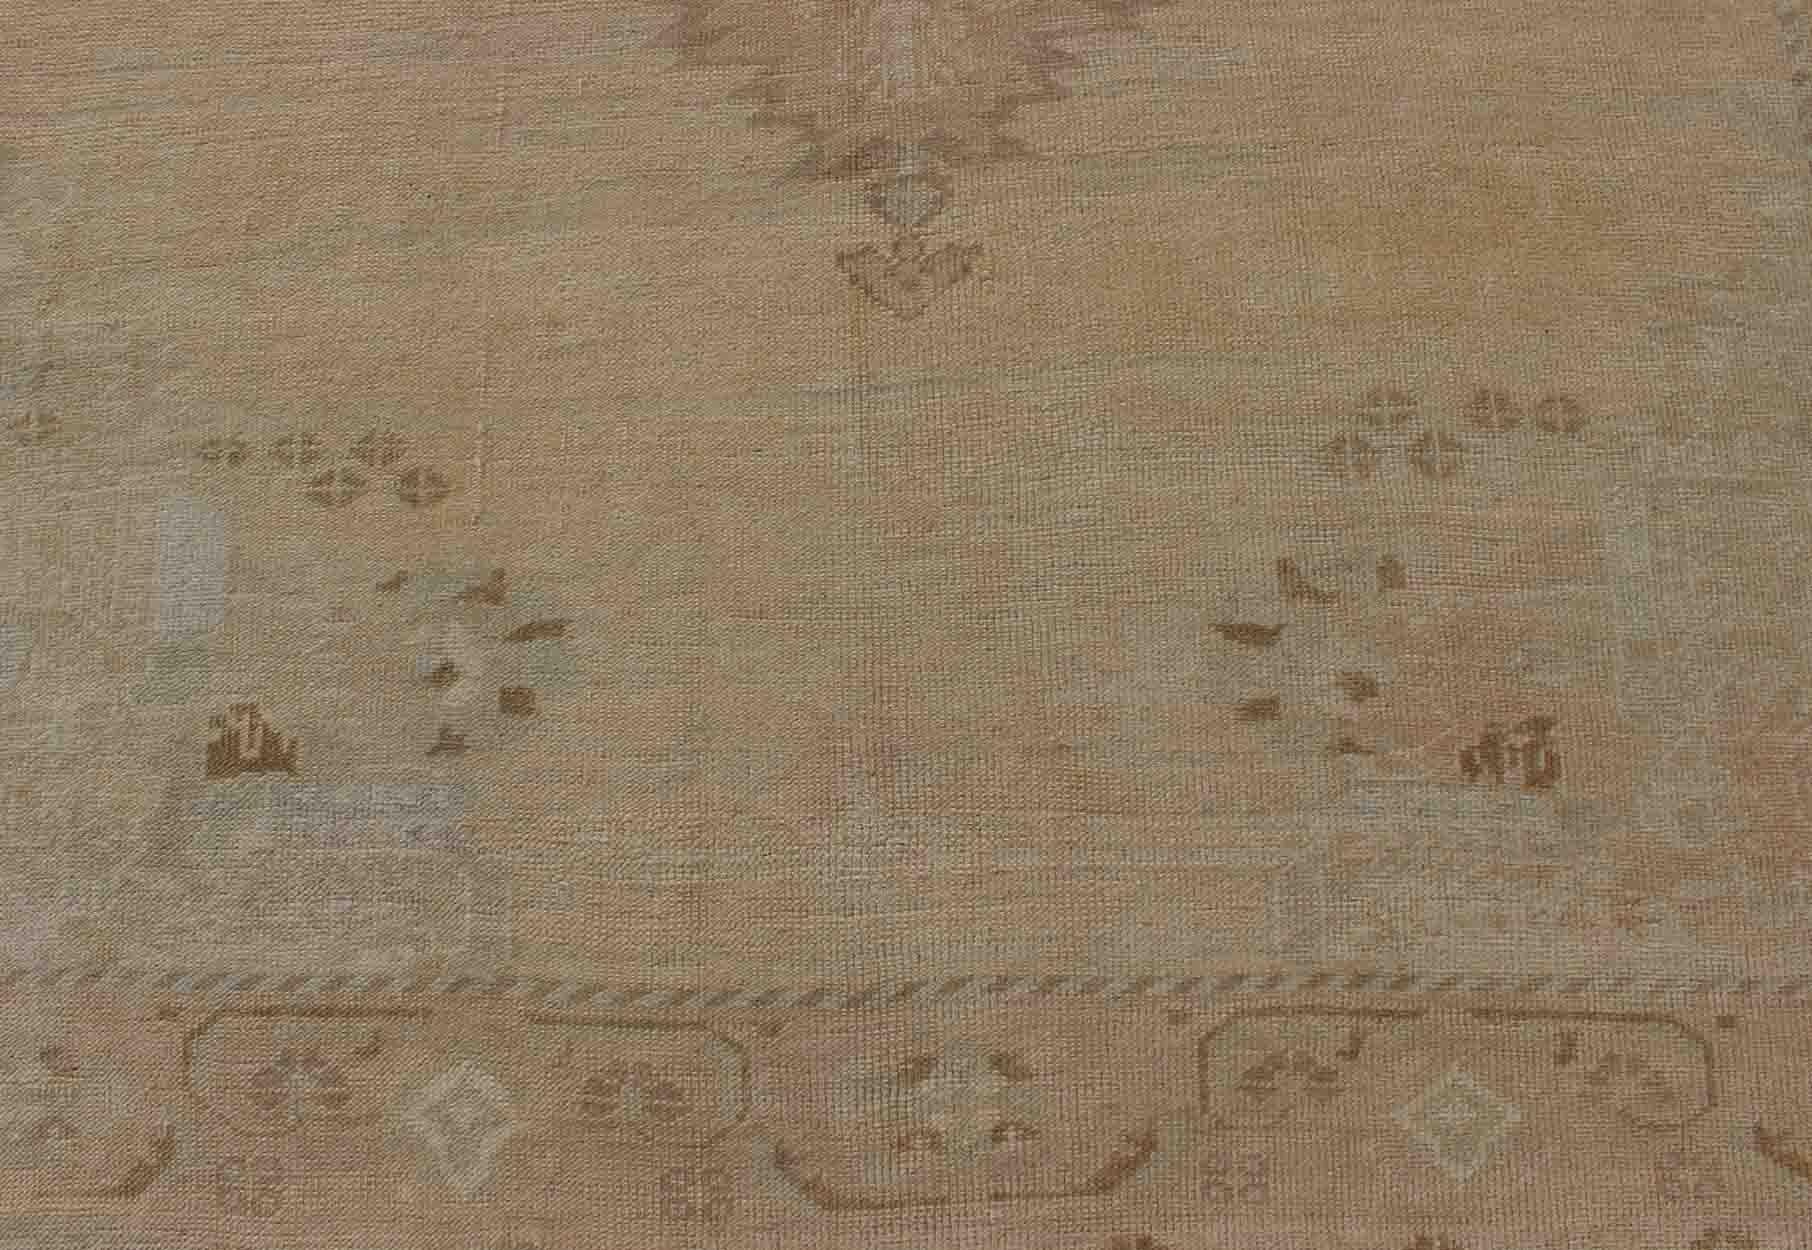 Vintage Turkish Oushak Rug with Medallion Design in Camel, Taupe, and Tan For Sale 2